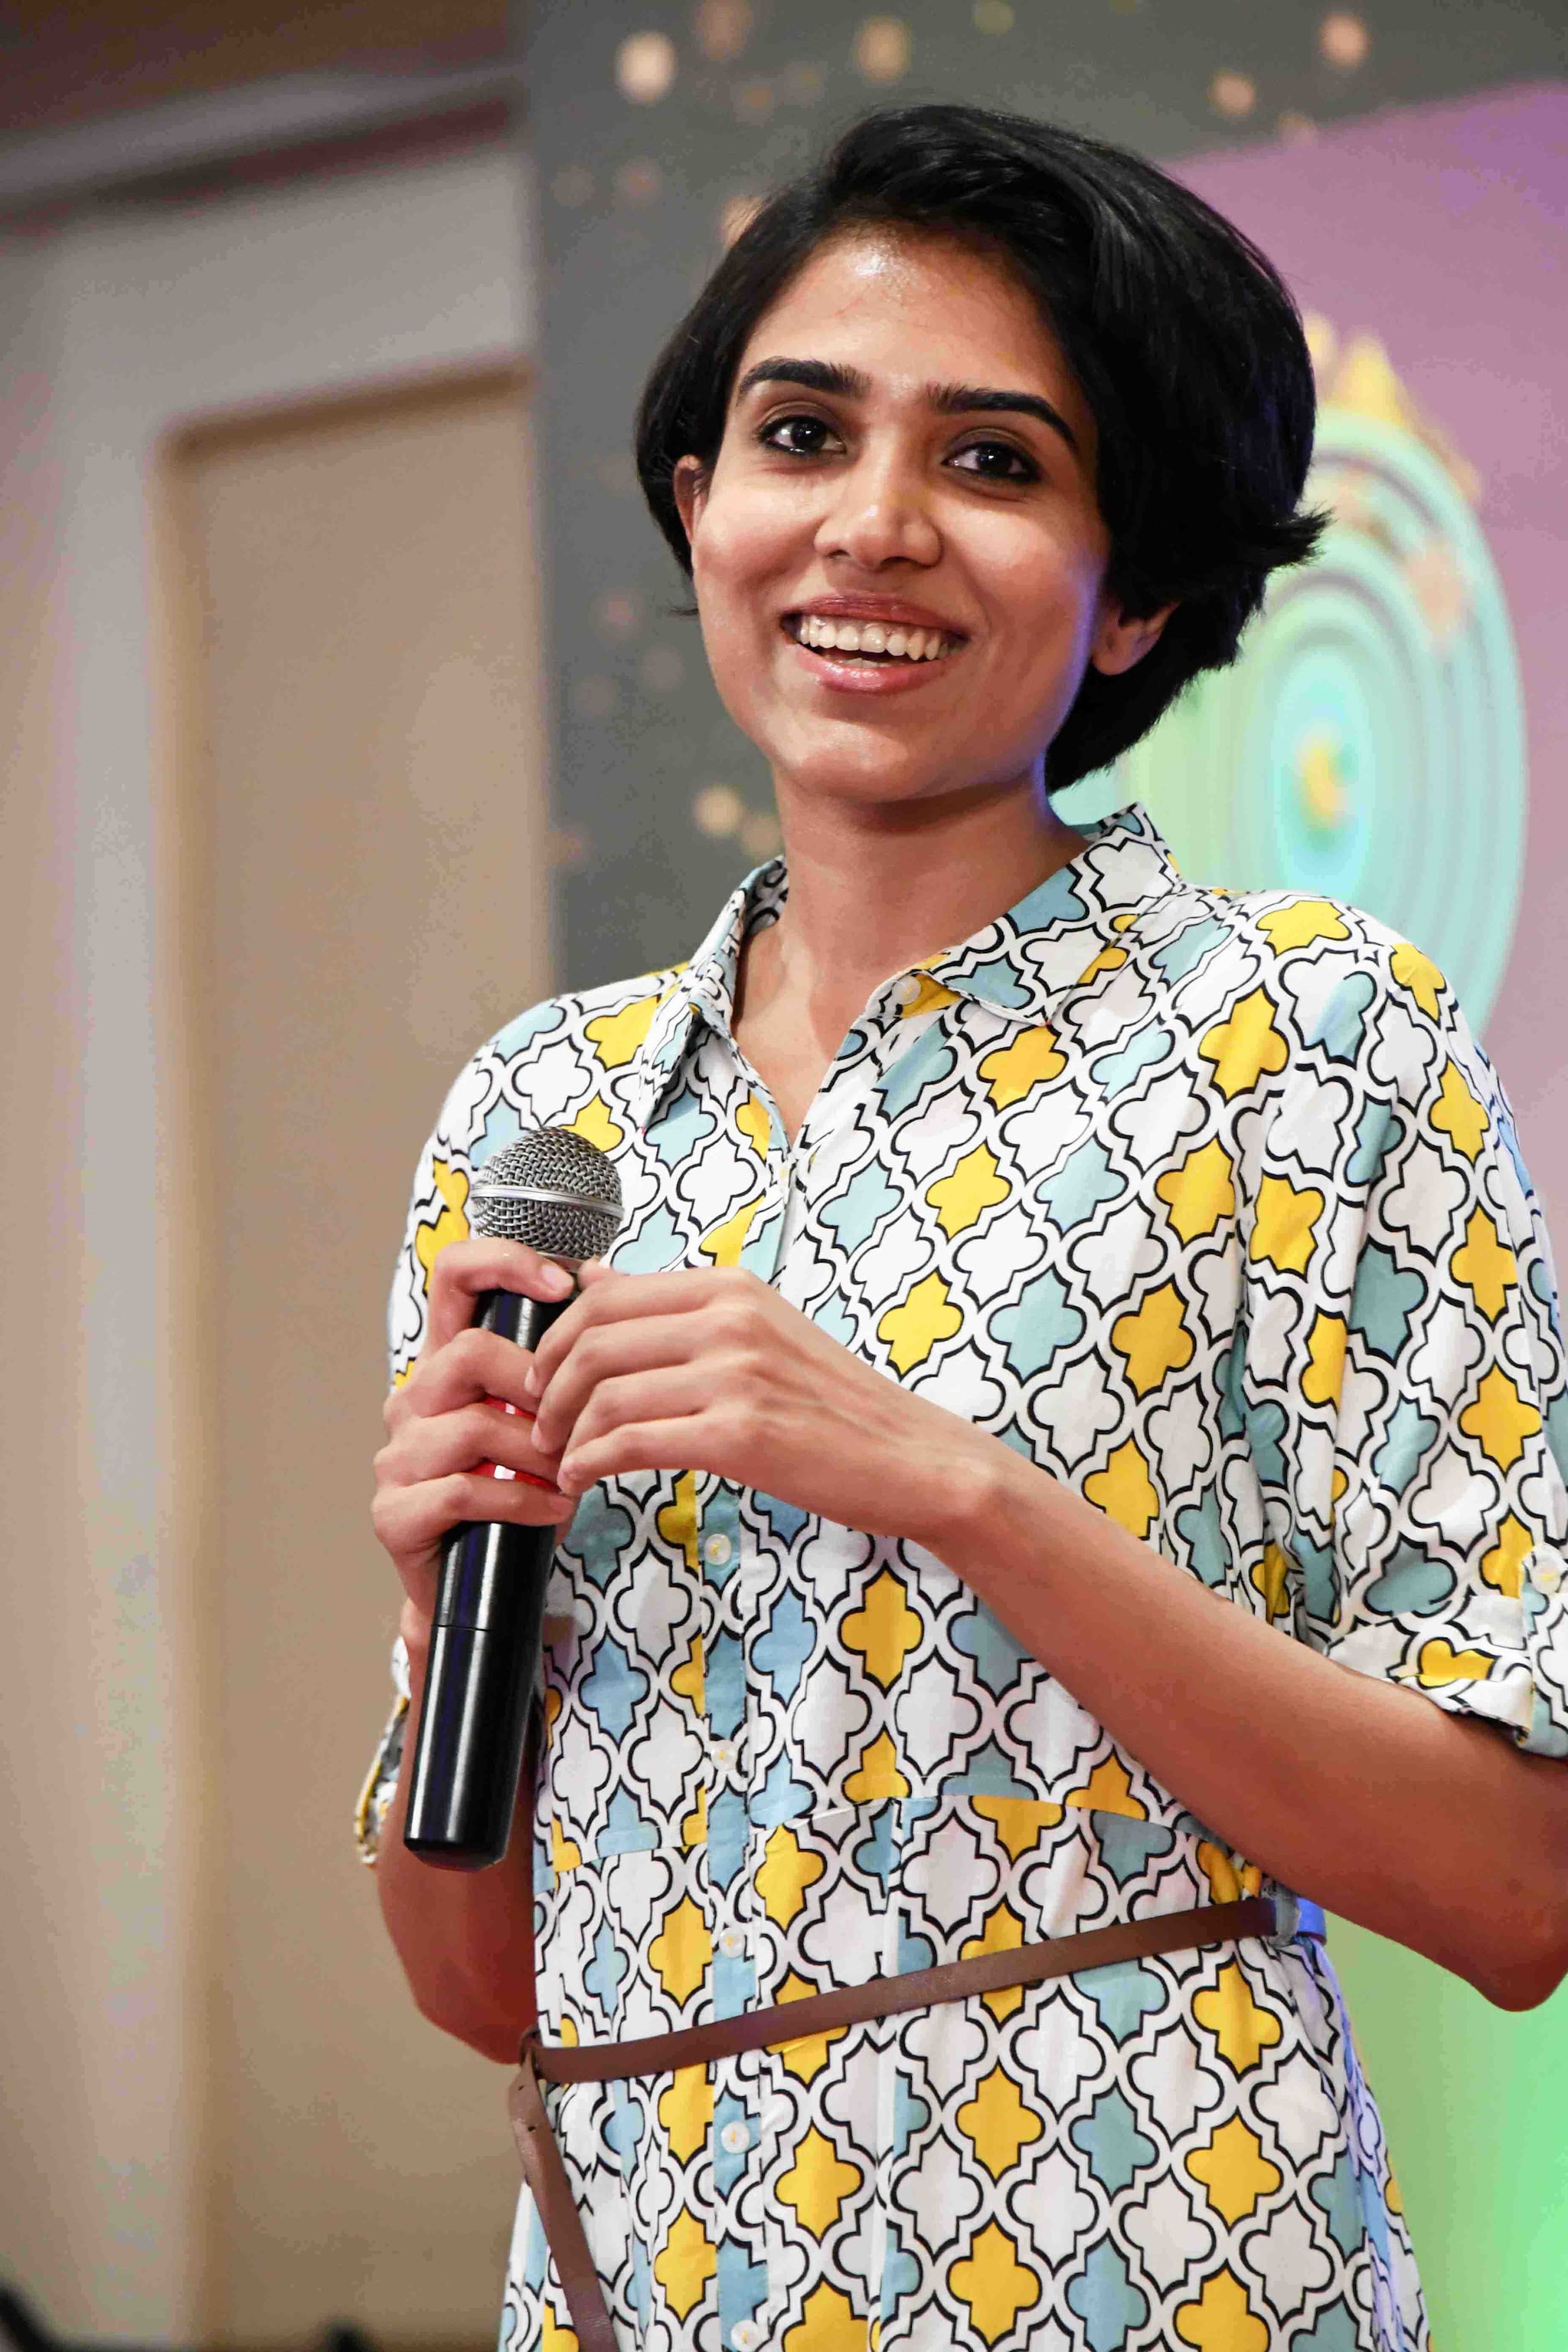 Jyothy Karat giving a talk at an event organised by Mathrubhumi in Kerala.